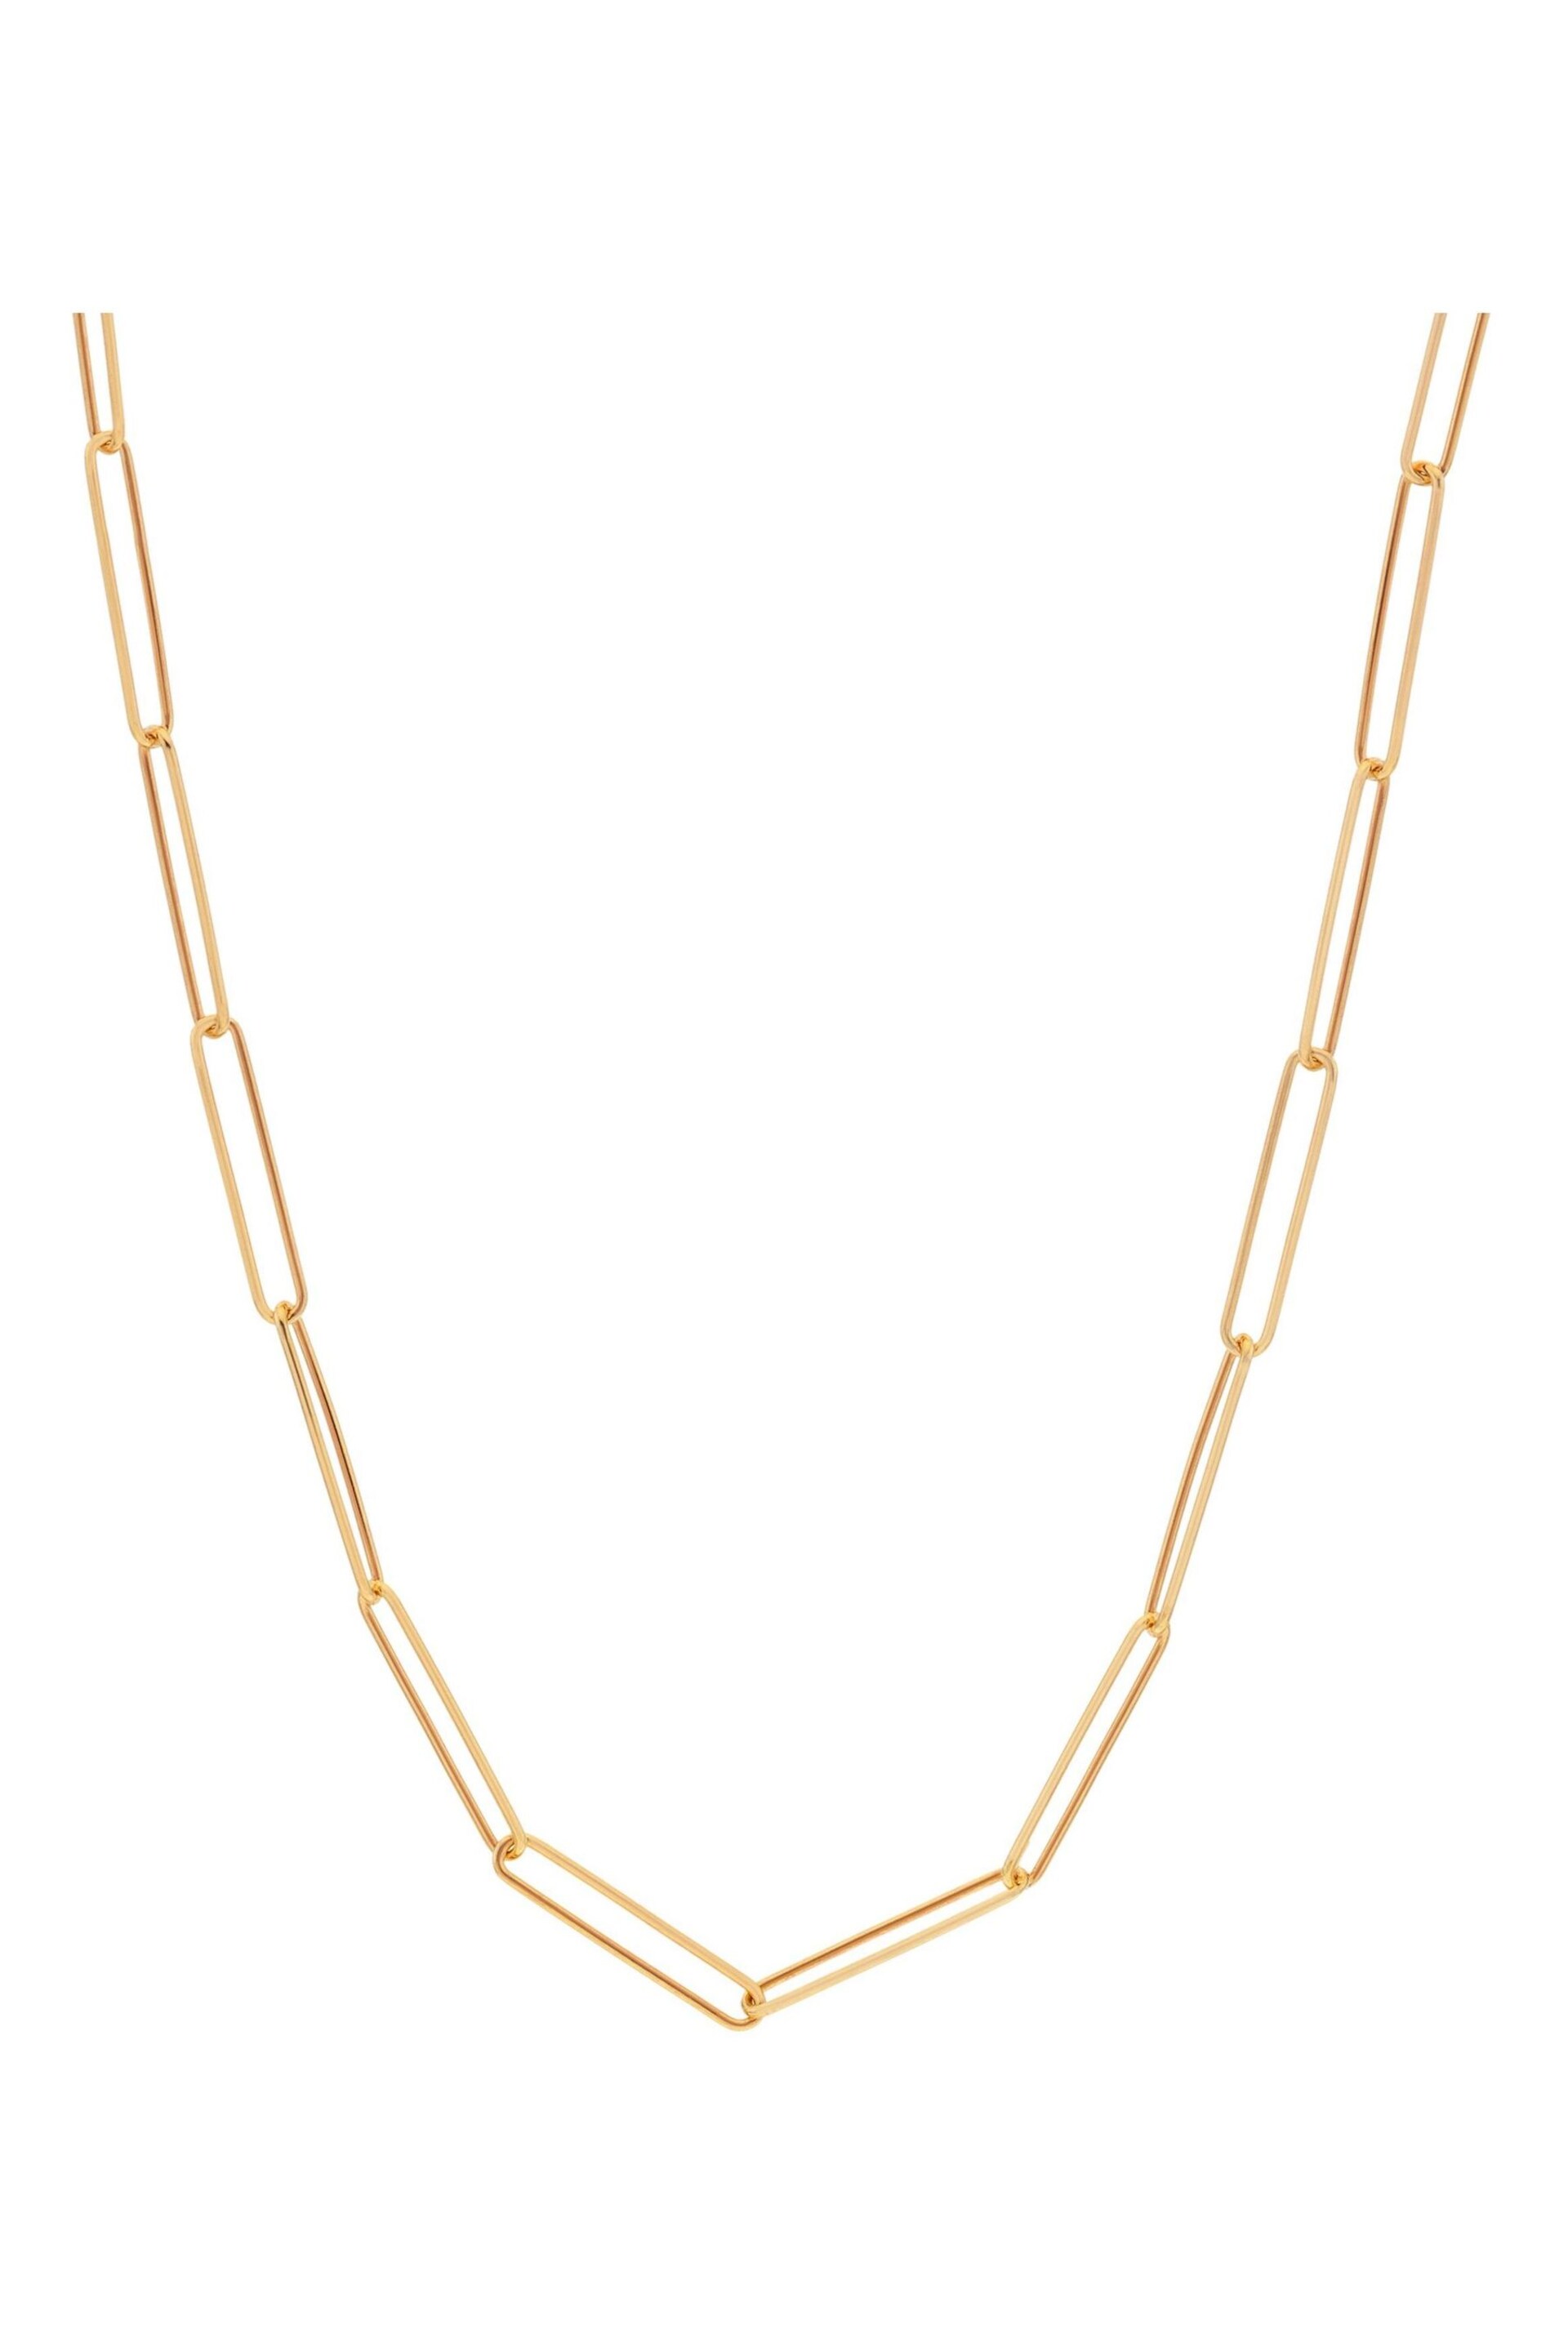 Hot Diamonds Gold Tone Embrace Square Wired 50cm Chain Necklace - Image 2 of 3